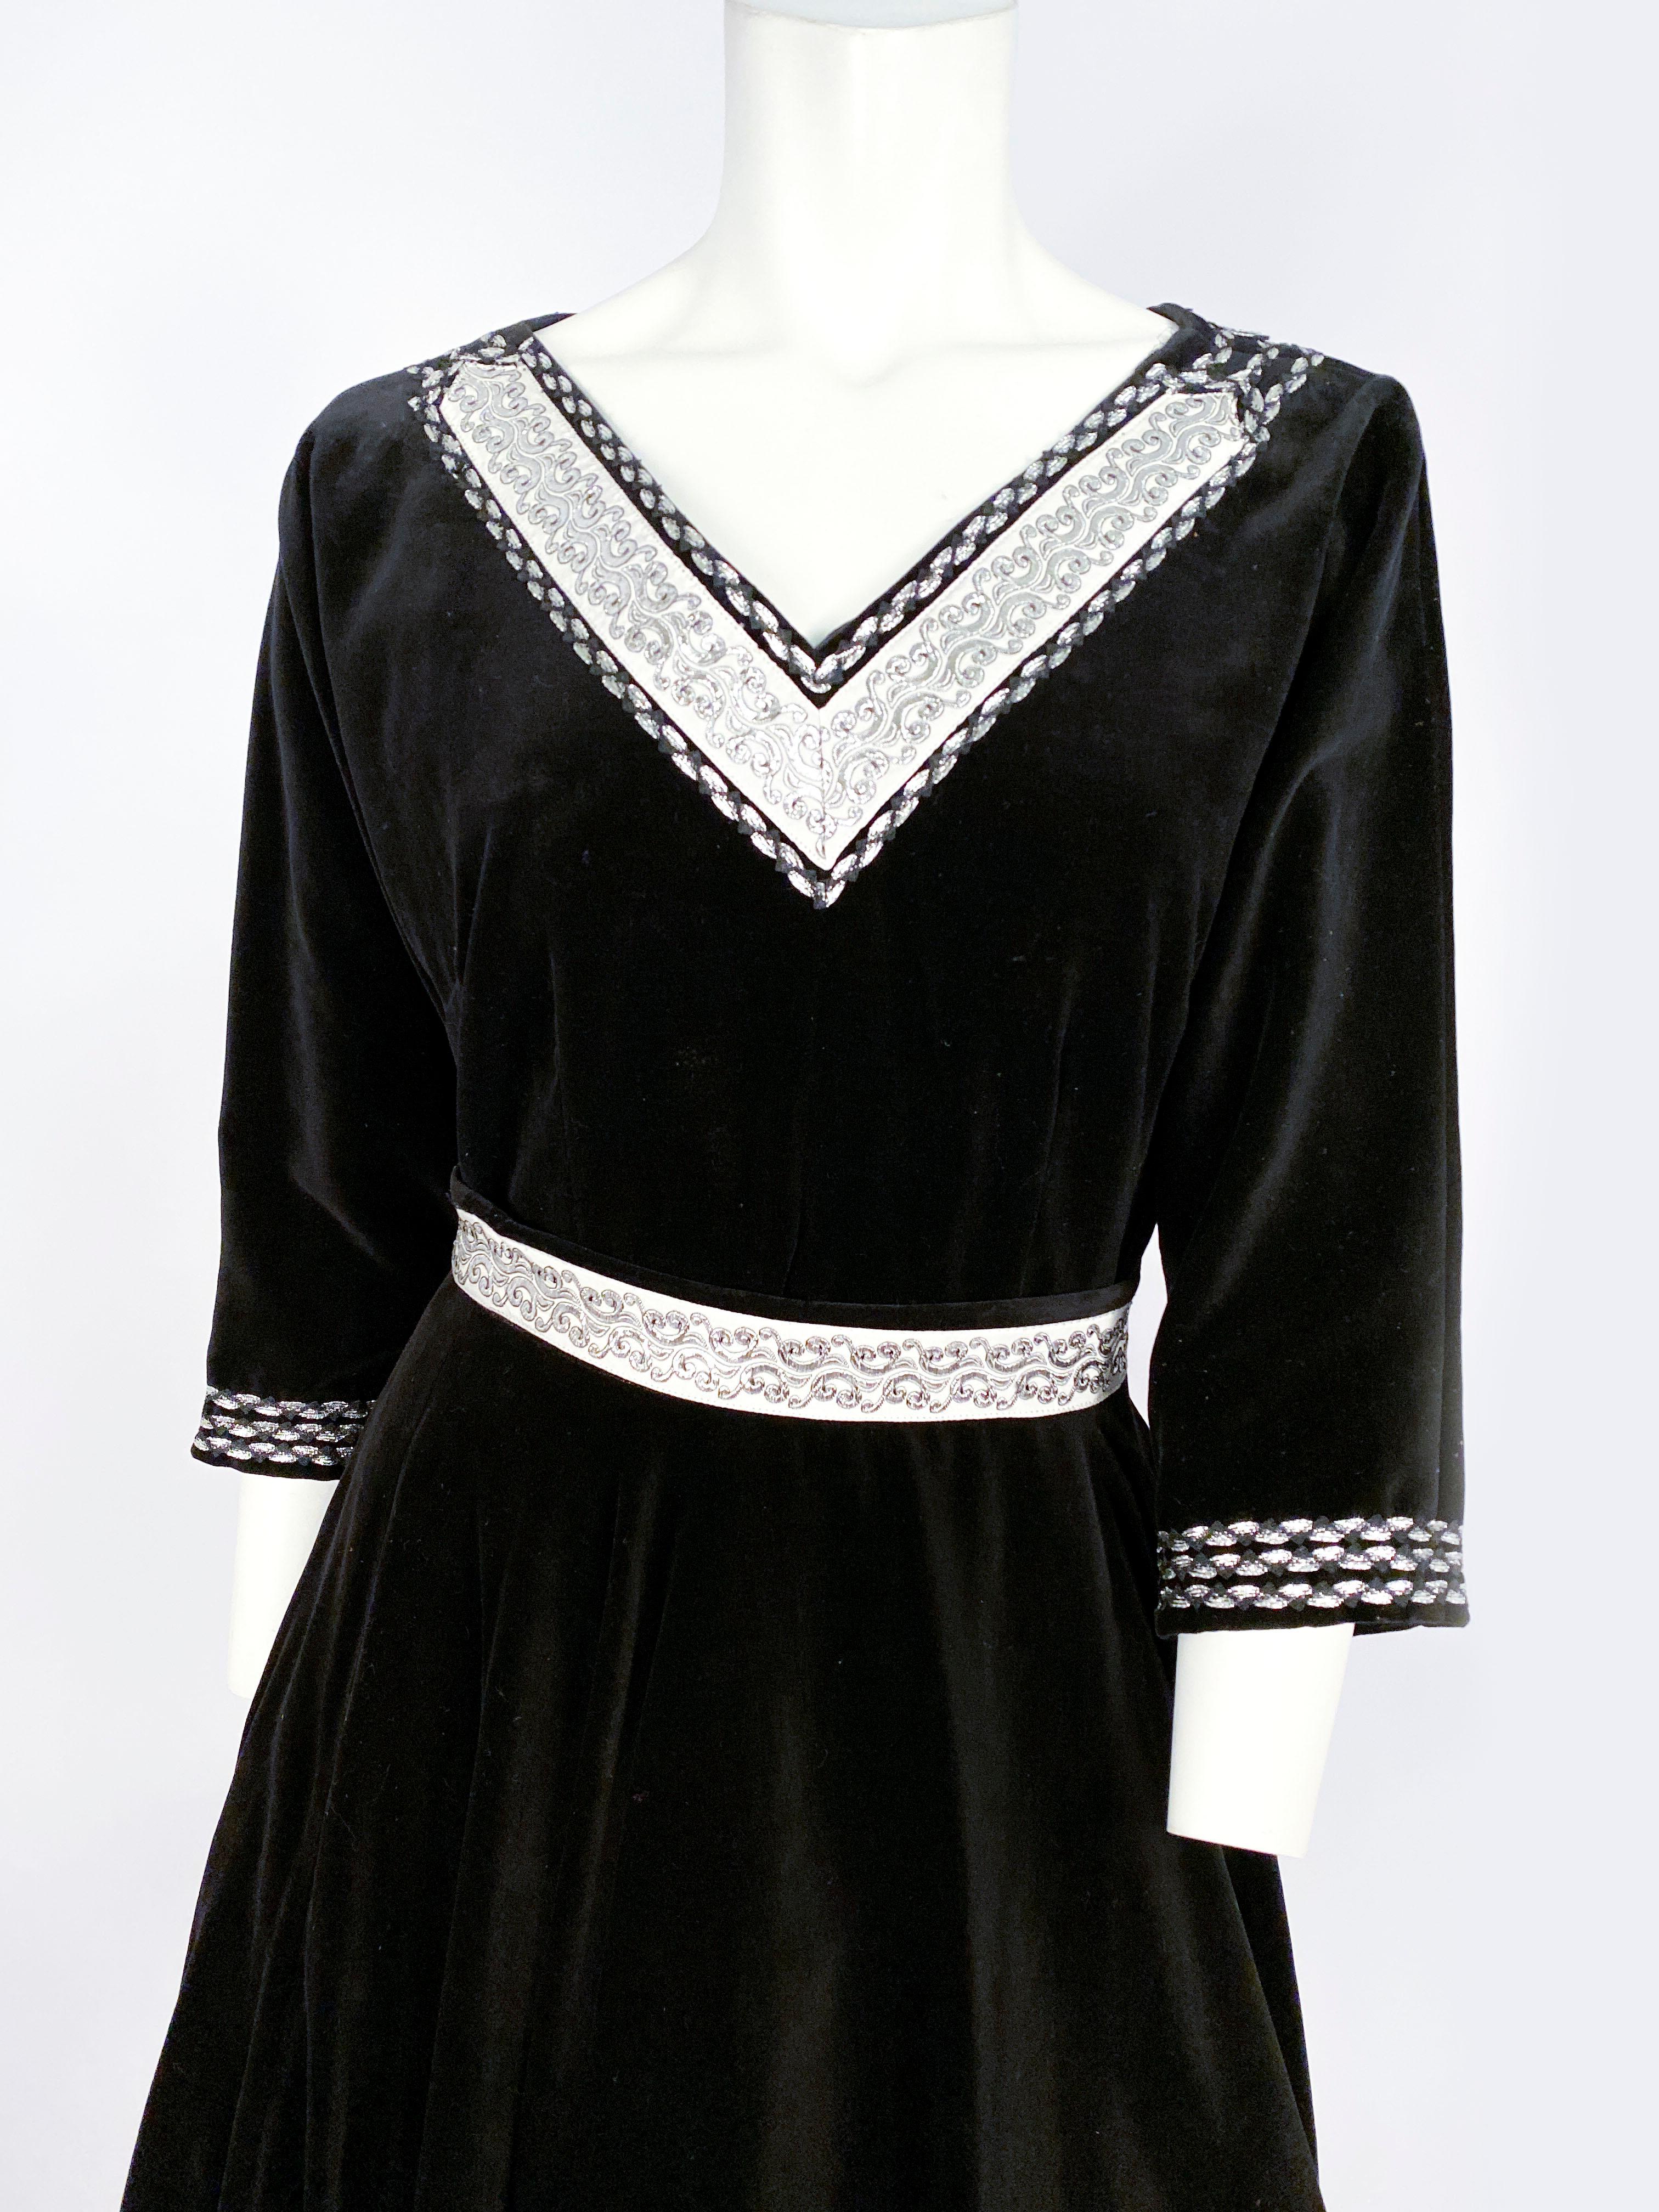 1950s black velvet two-piece patio set (Blouse and skirt) with full circle skirt and v-neckline. The skirt and blouse have a silver lurex bric-a-brack trimming and grosgrain ribbon. This ensemble was shot and styled with a petticoat which is not